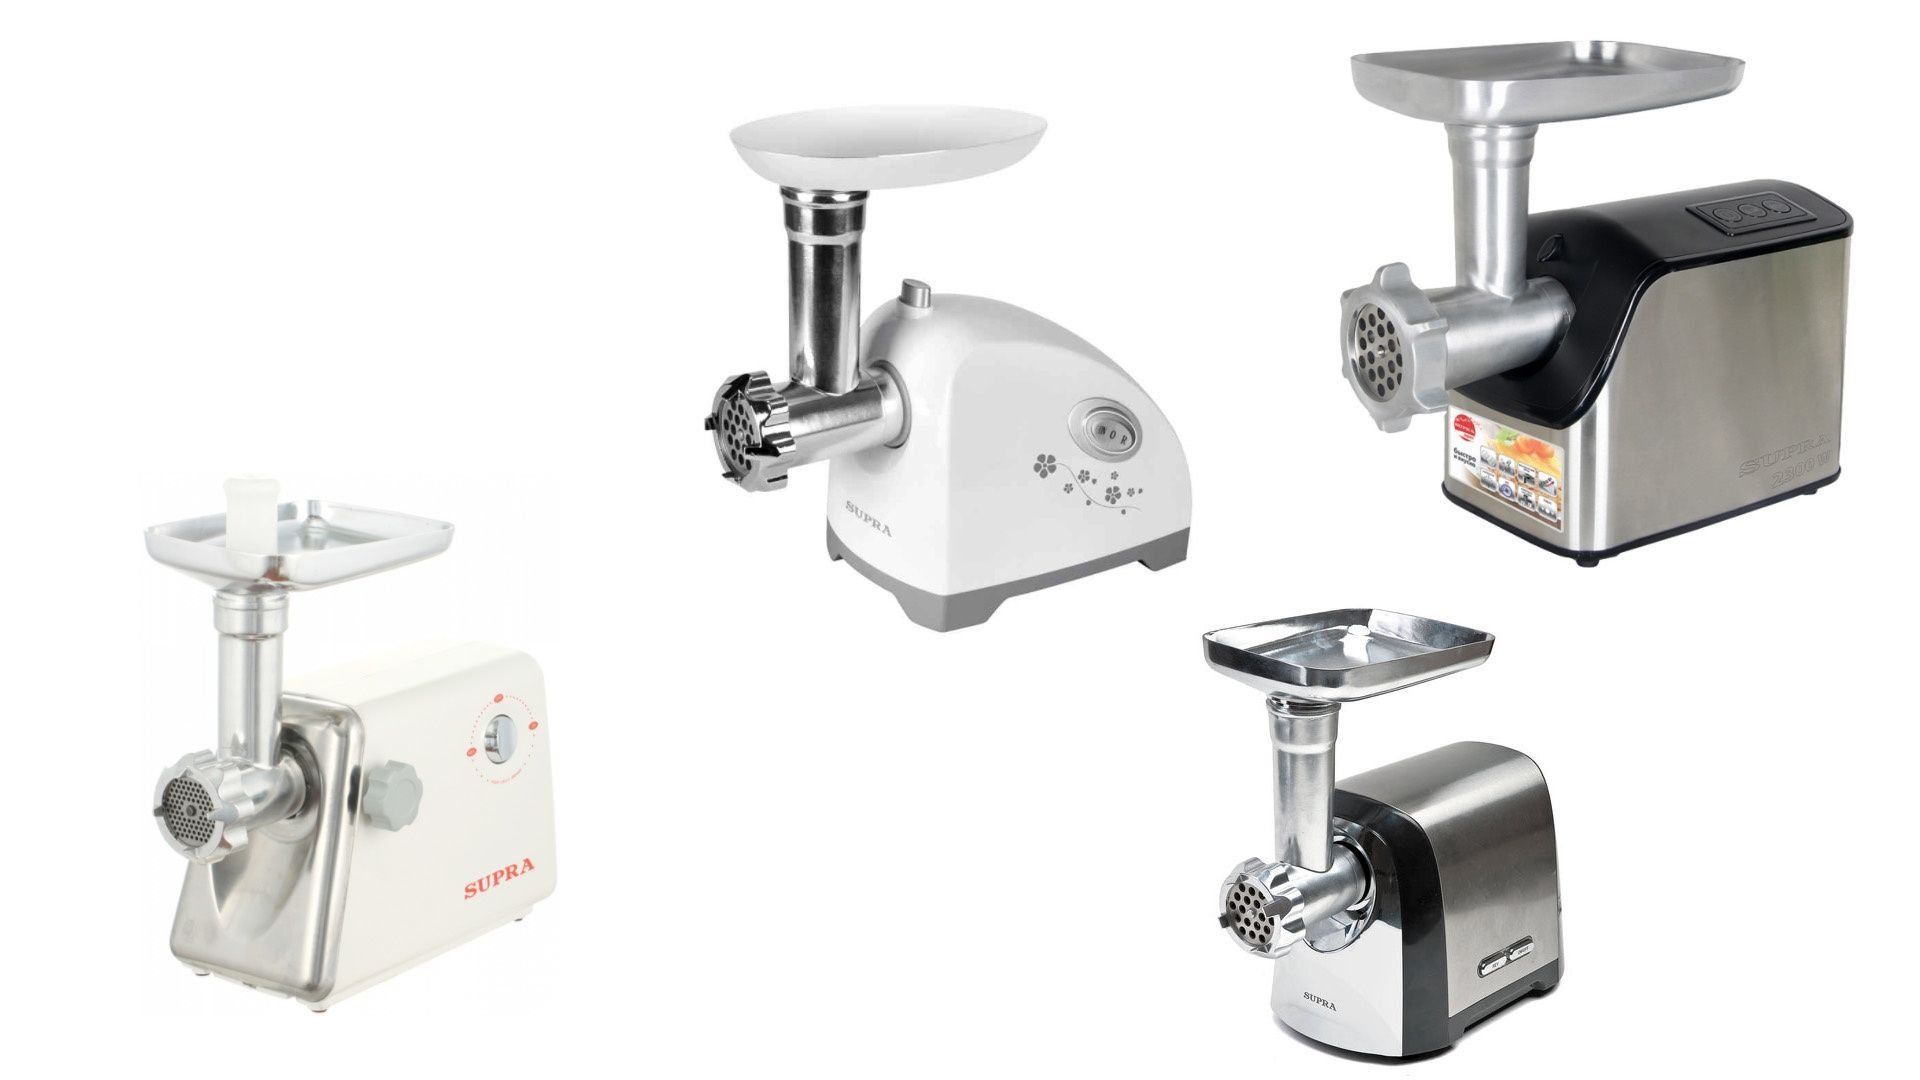 Overview of the best Supra meat grinders for the home